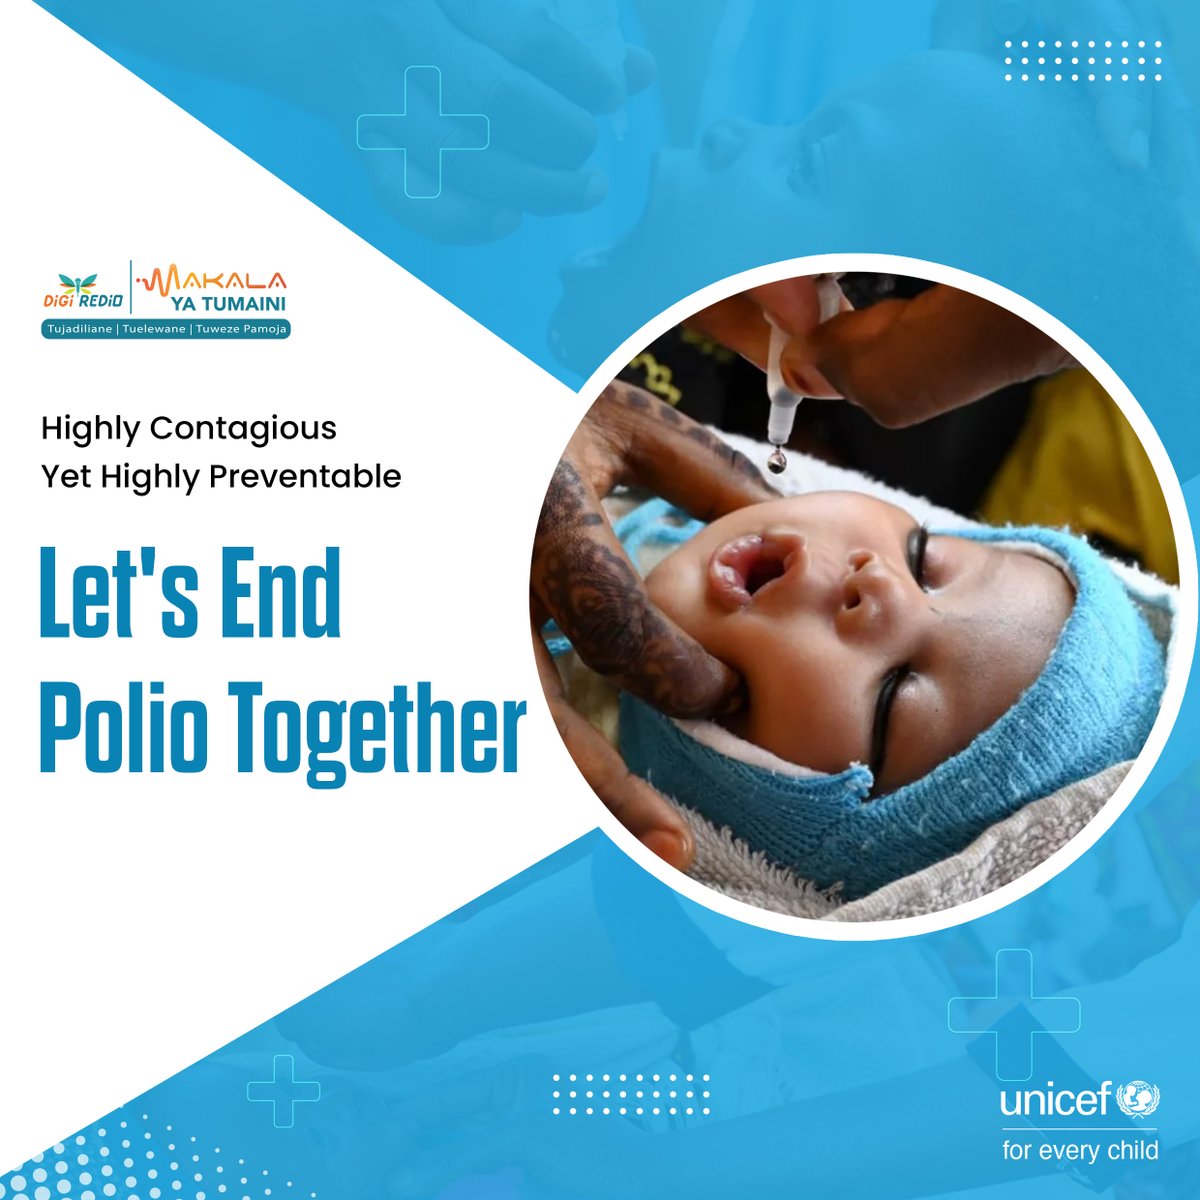 Did you know polio is transmitted through water that is contaminated with the faeces of an infected person? Let's end #polio by ensuring every child is vaccinated.  Join us on #MakalaYaTumaini Radio show​

@UNICEFKenya
@MOH_Kenya
@MOH_DHP
​@VaccinesKenya
@CBCC_Africa